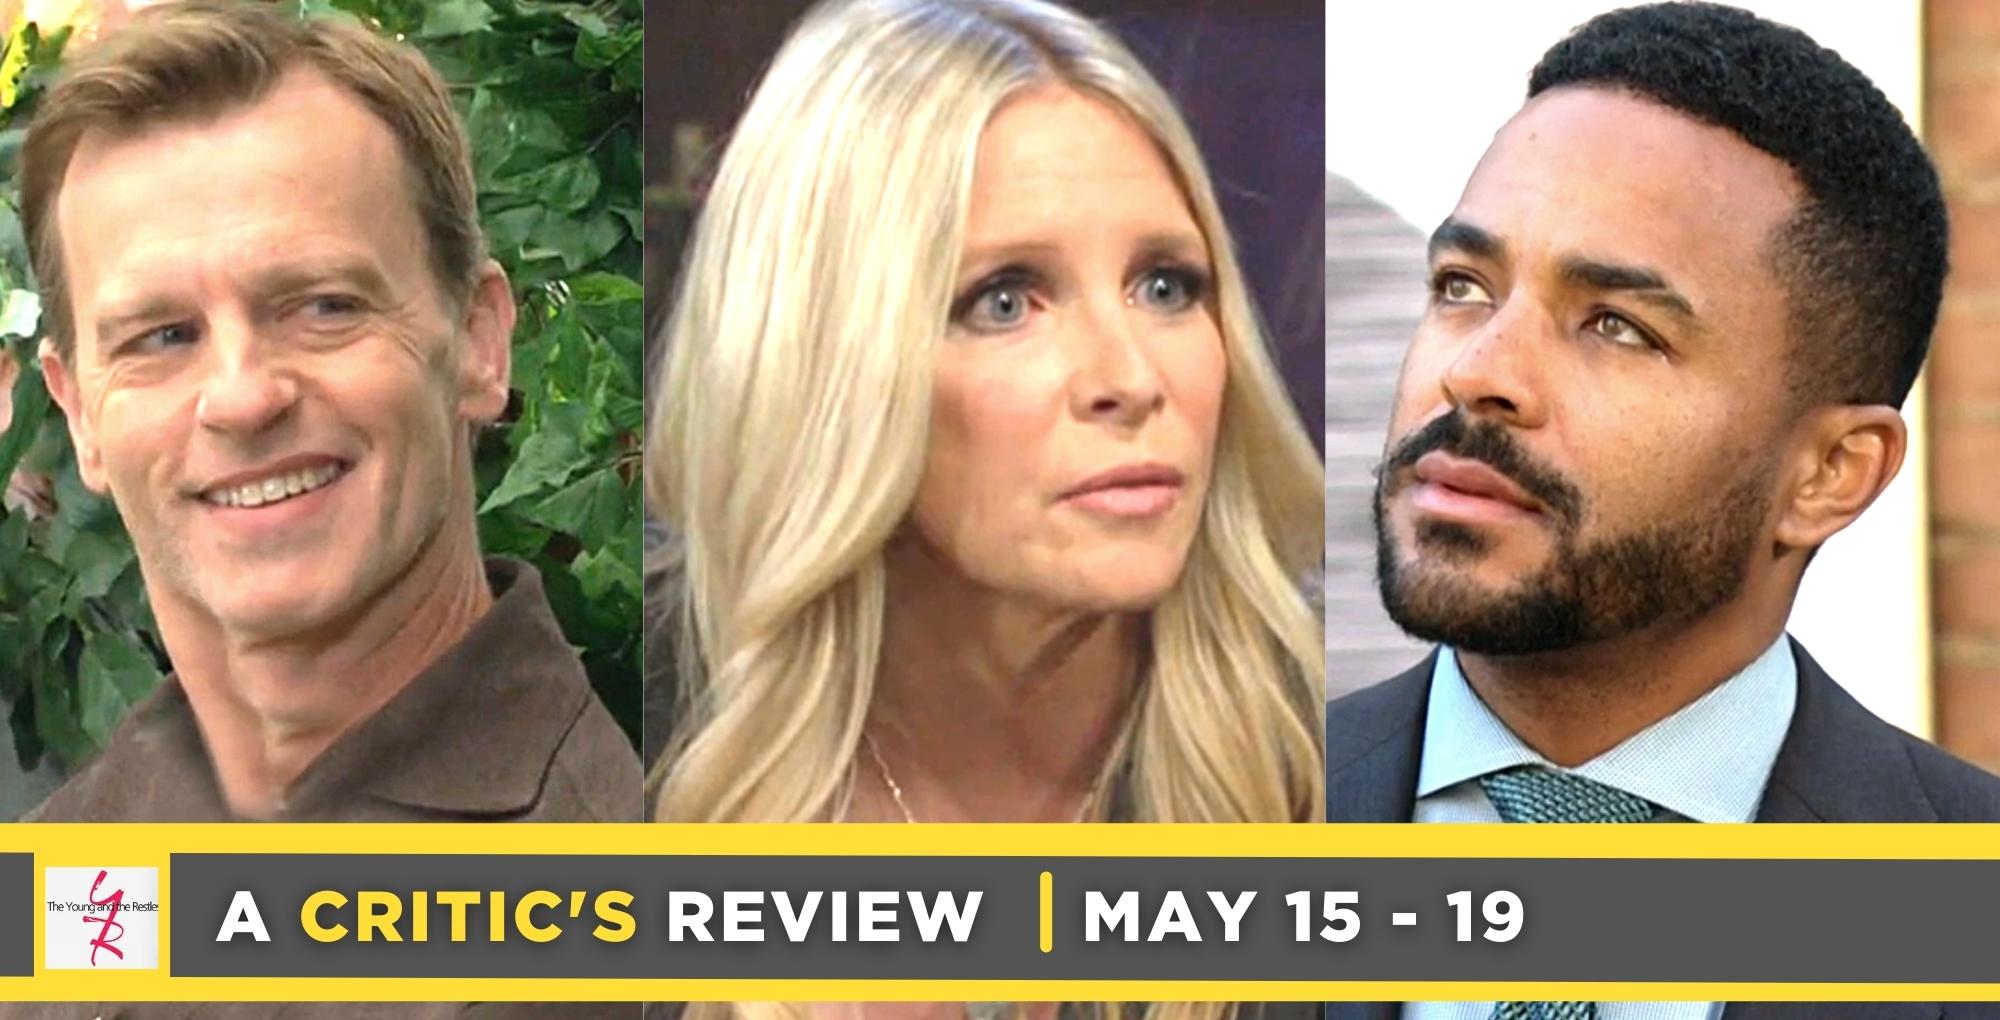 the young and the restless critic's review for may 15 – may 19, 2023, three images tucker, christine, and nate.